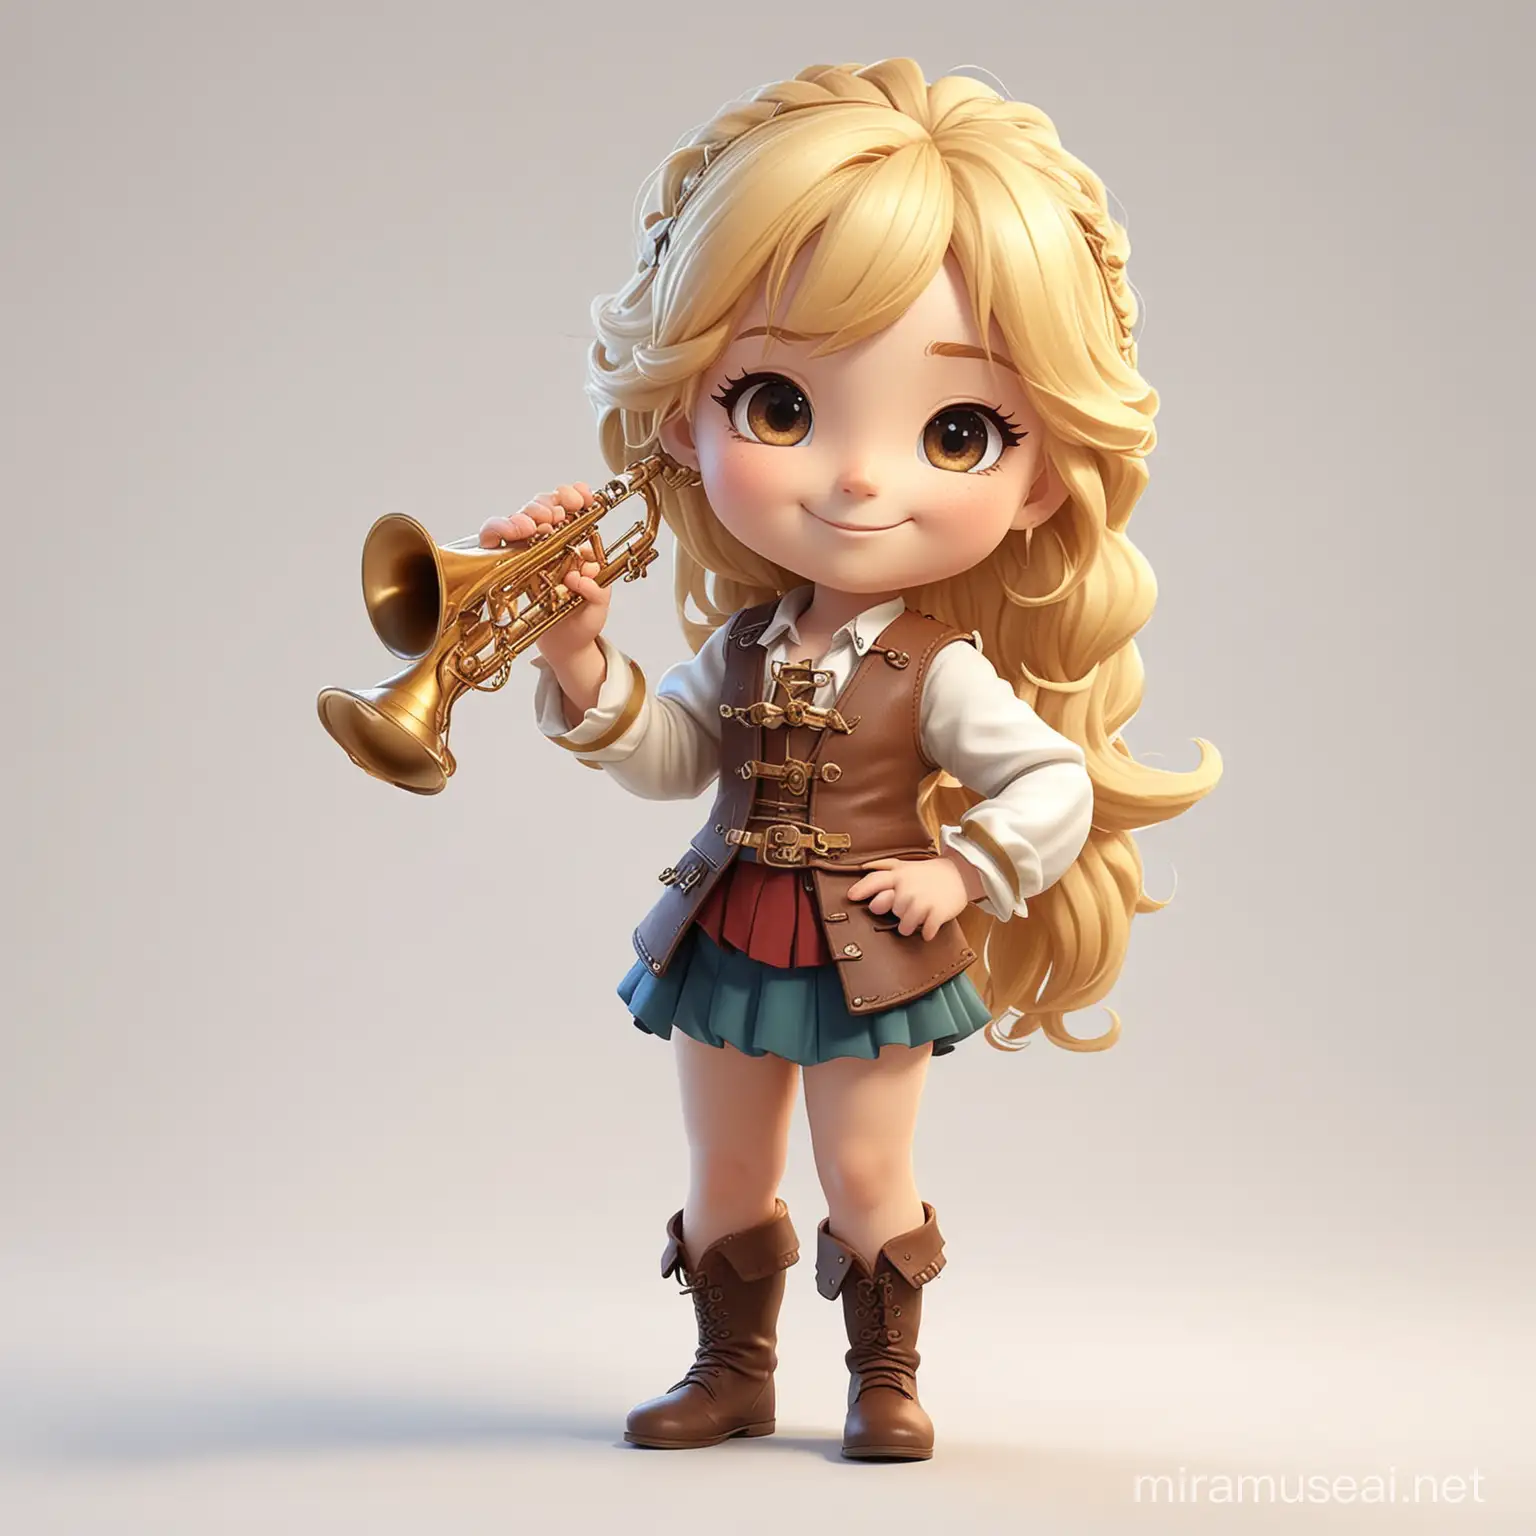 female child bard smiling blonde hair holding a wind instrument on a white background full body chibi style